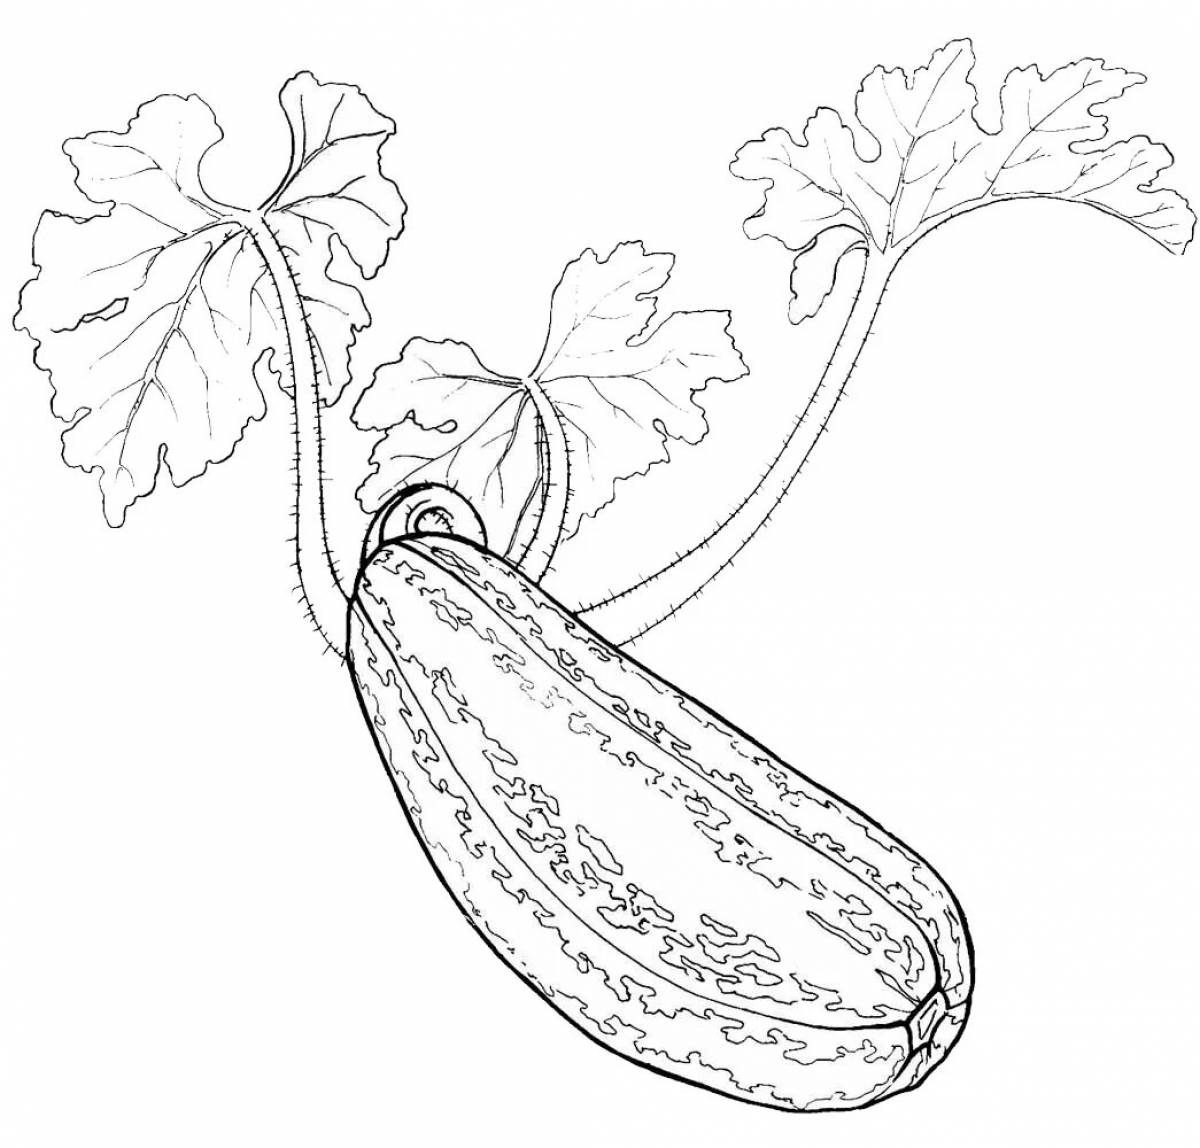 Exquisite zucchini coloring book for babies